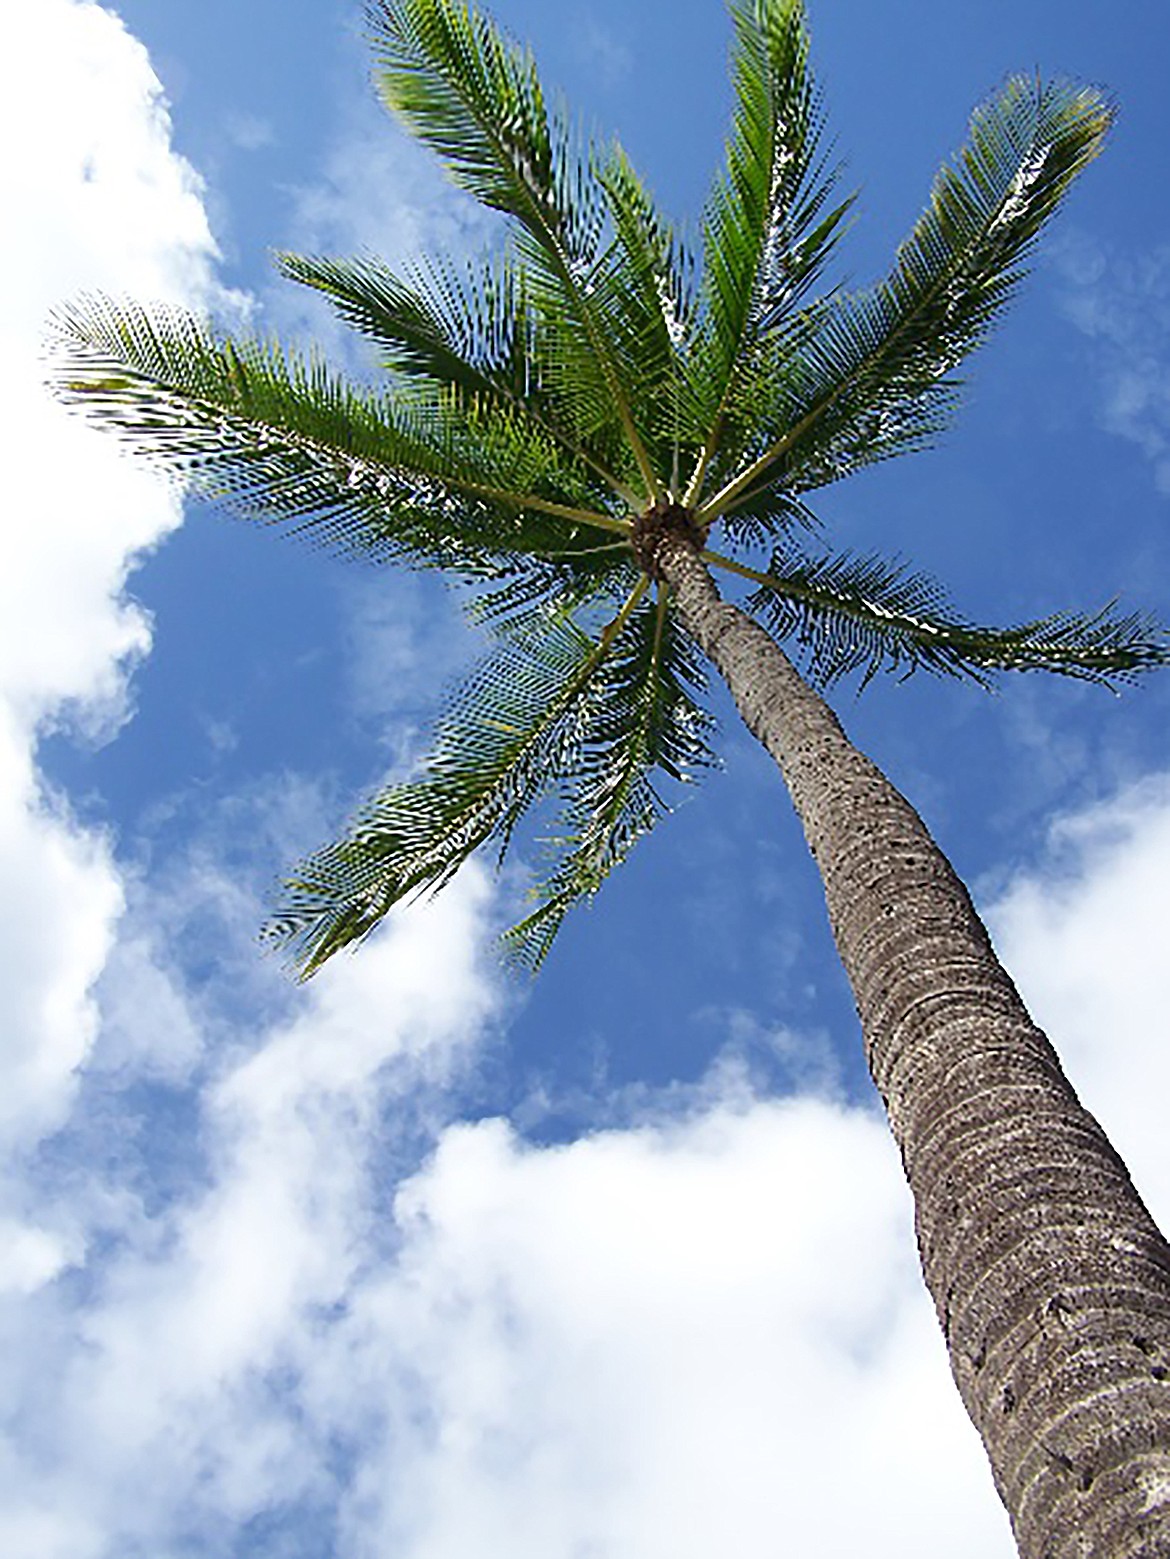 A photo of a palm tree taken by A.C. Woolnough during a previous trip.